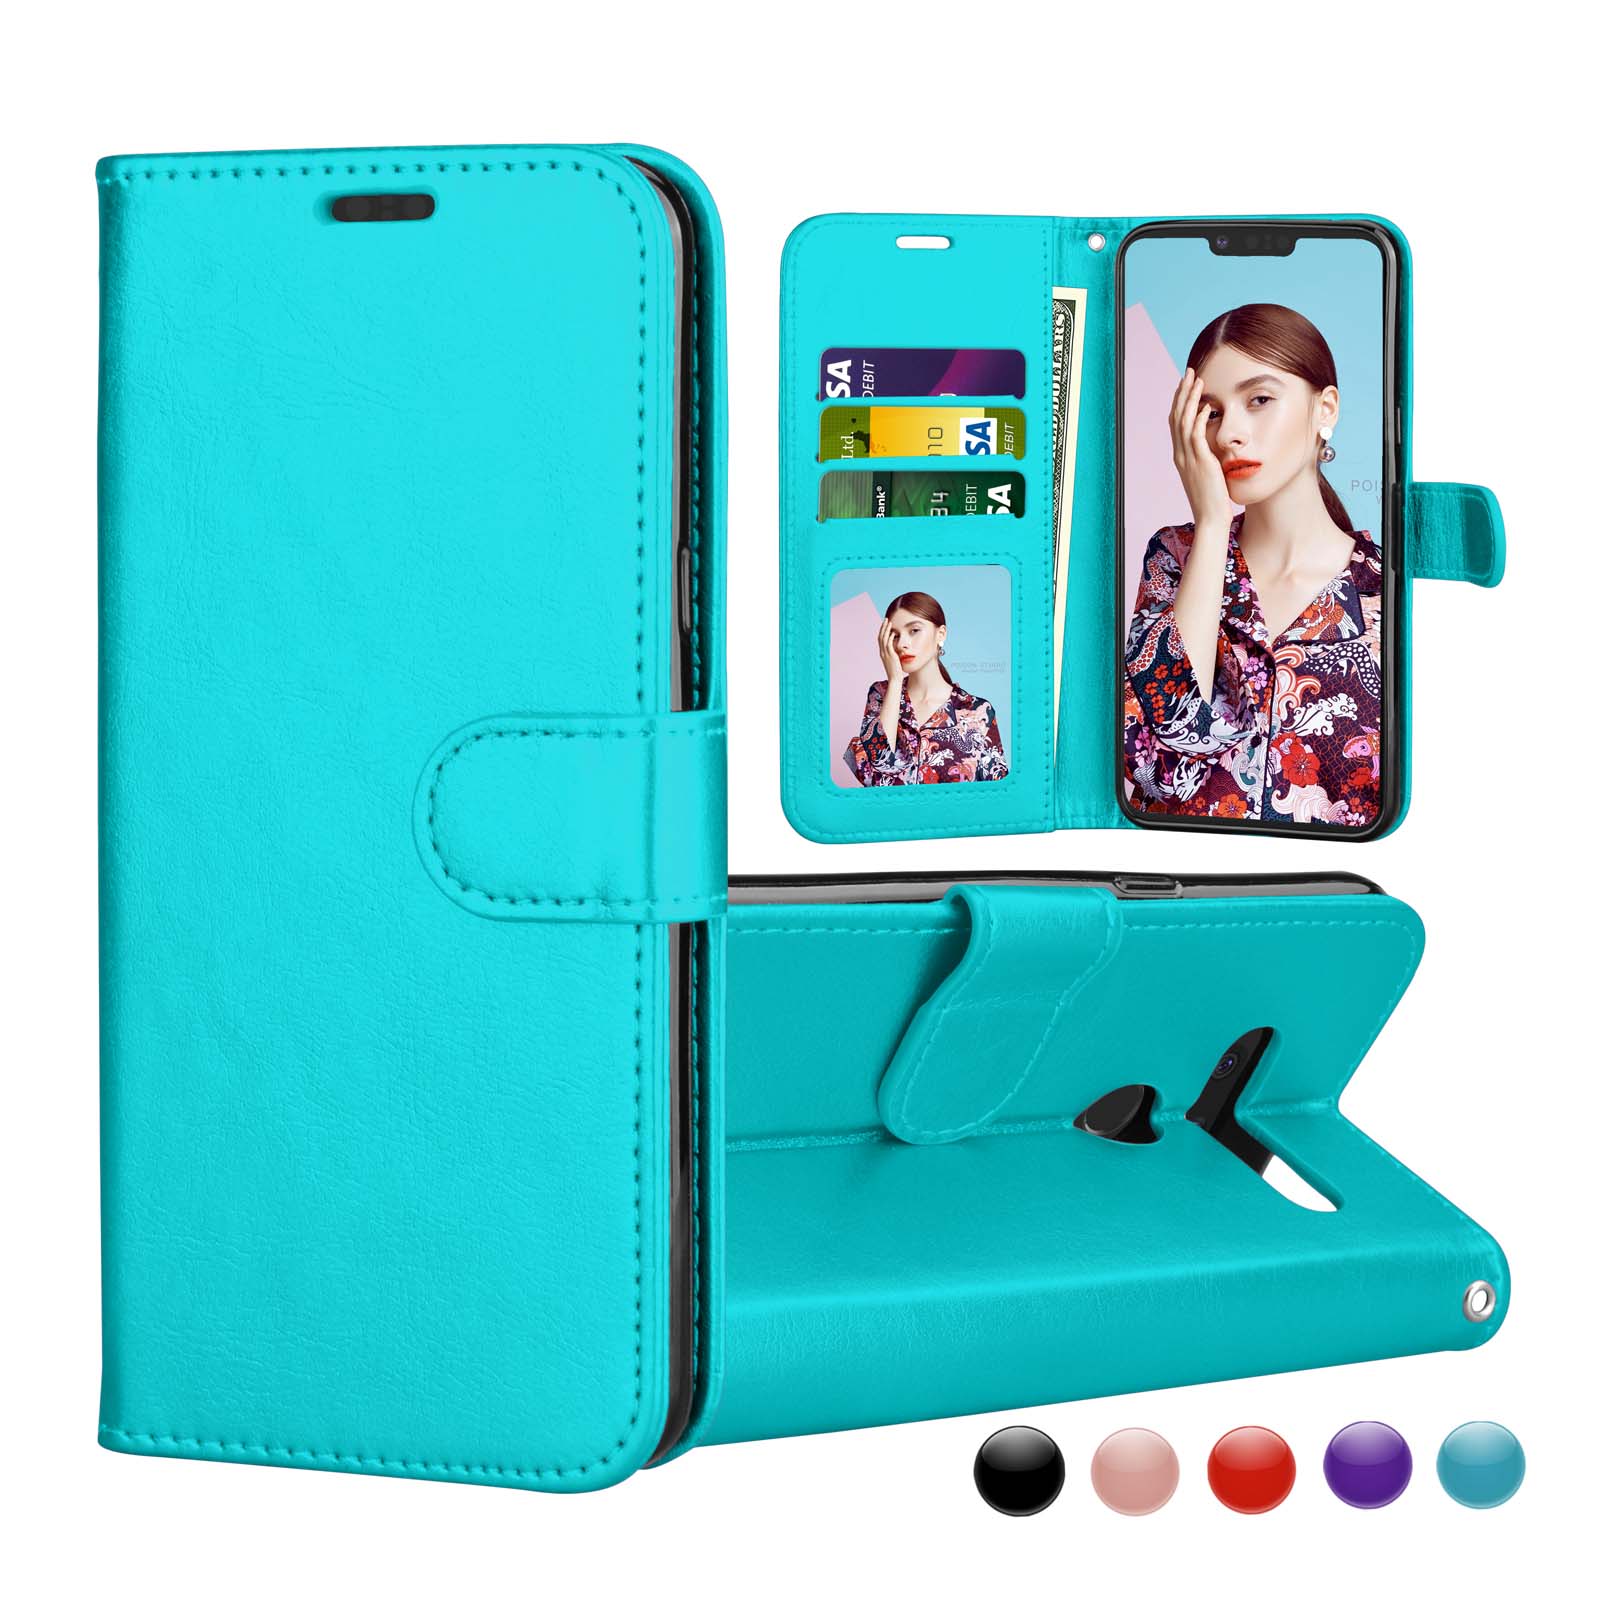 LG G8 Case, 2019 LG G8 ThinQ Wallet Cover, LG G8 PU Leather Case, Njjex [Wrist Strap] Flip Folio [Kickstand ] PU leather Wallet Case 3 ID&Credit Card Pockets for LG G8 6.1" 2019 -Blue - image 1 of 5